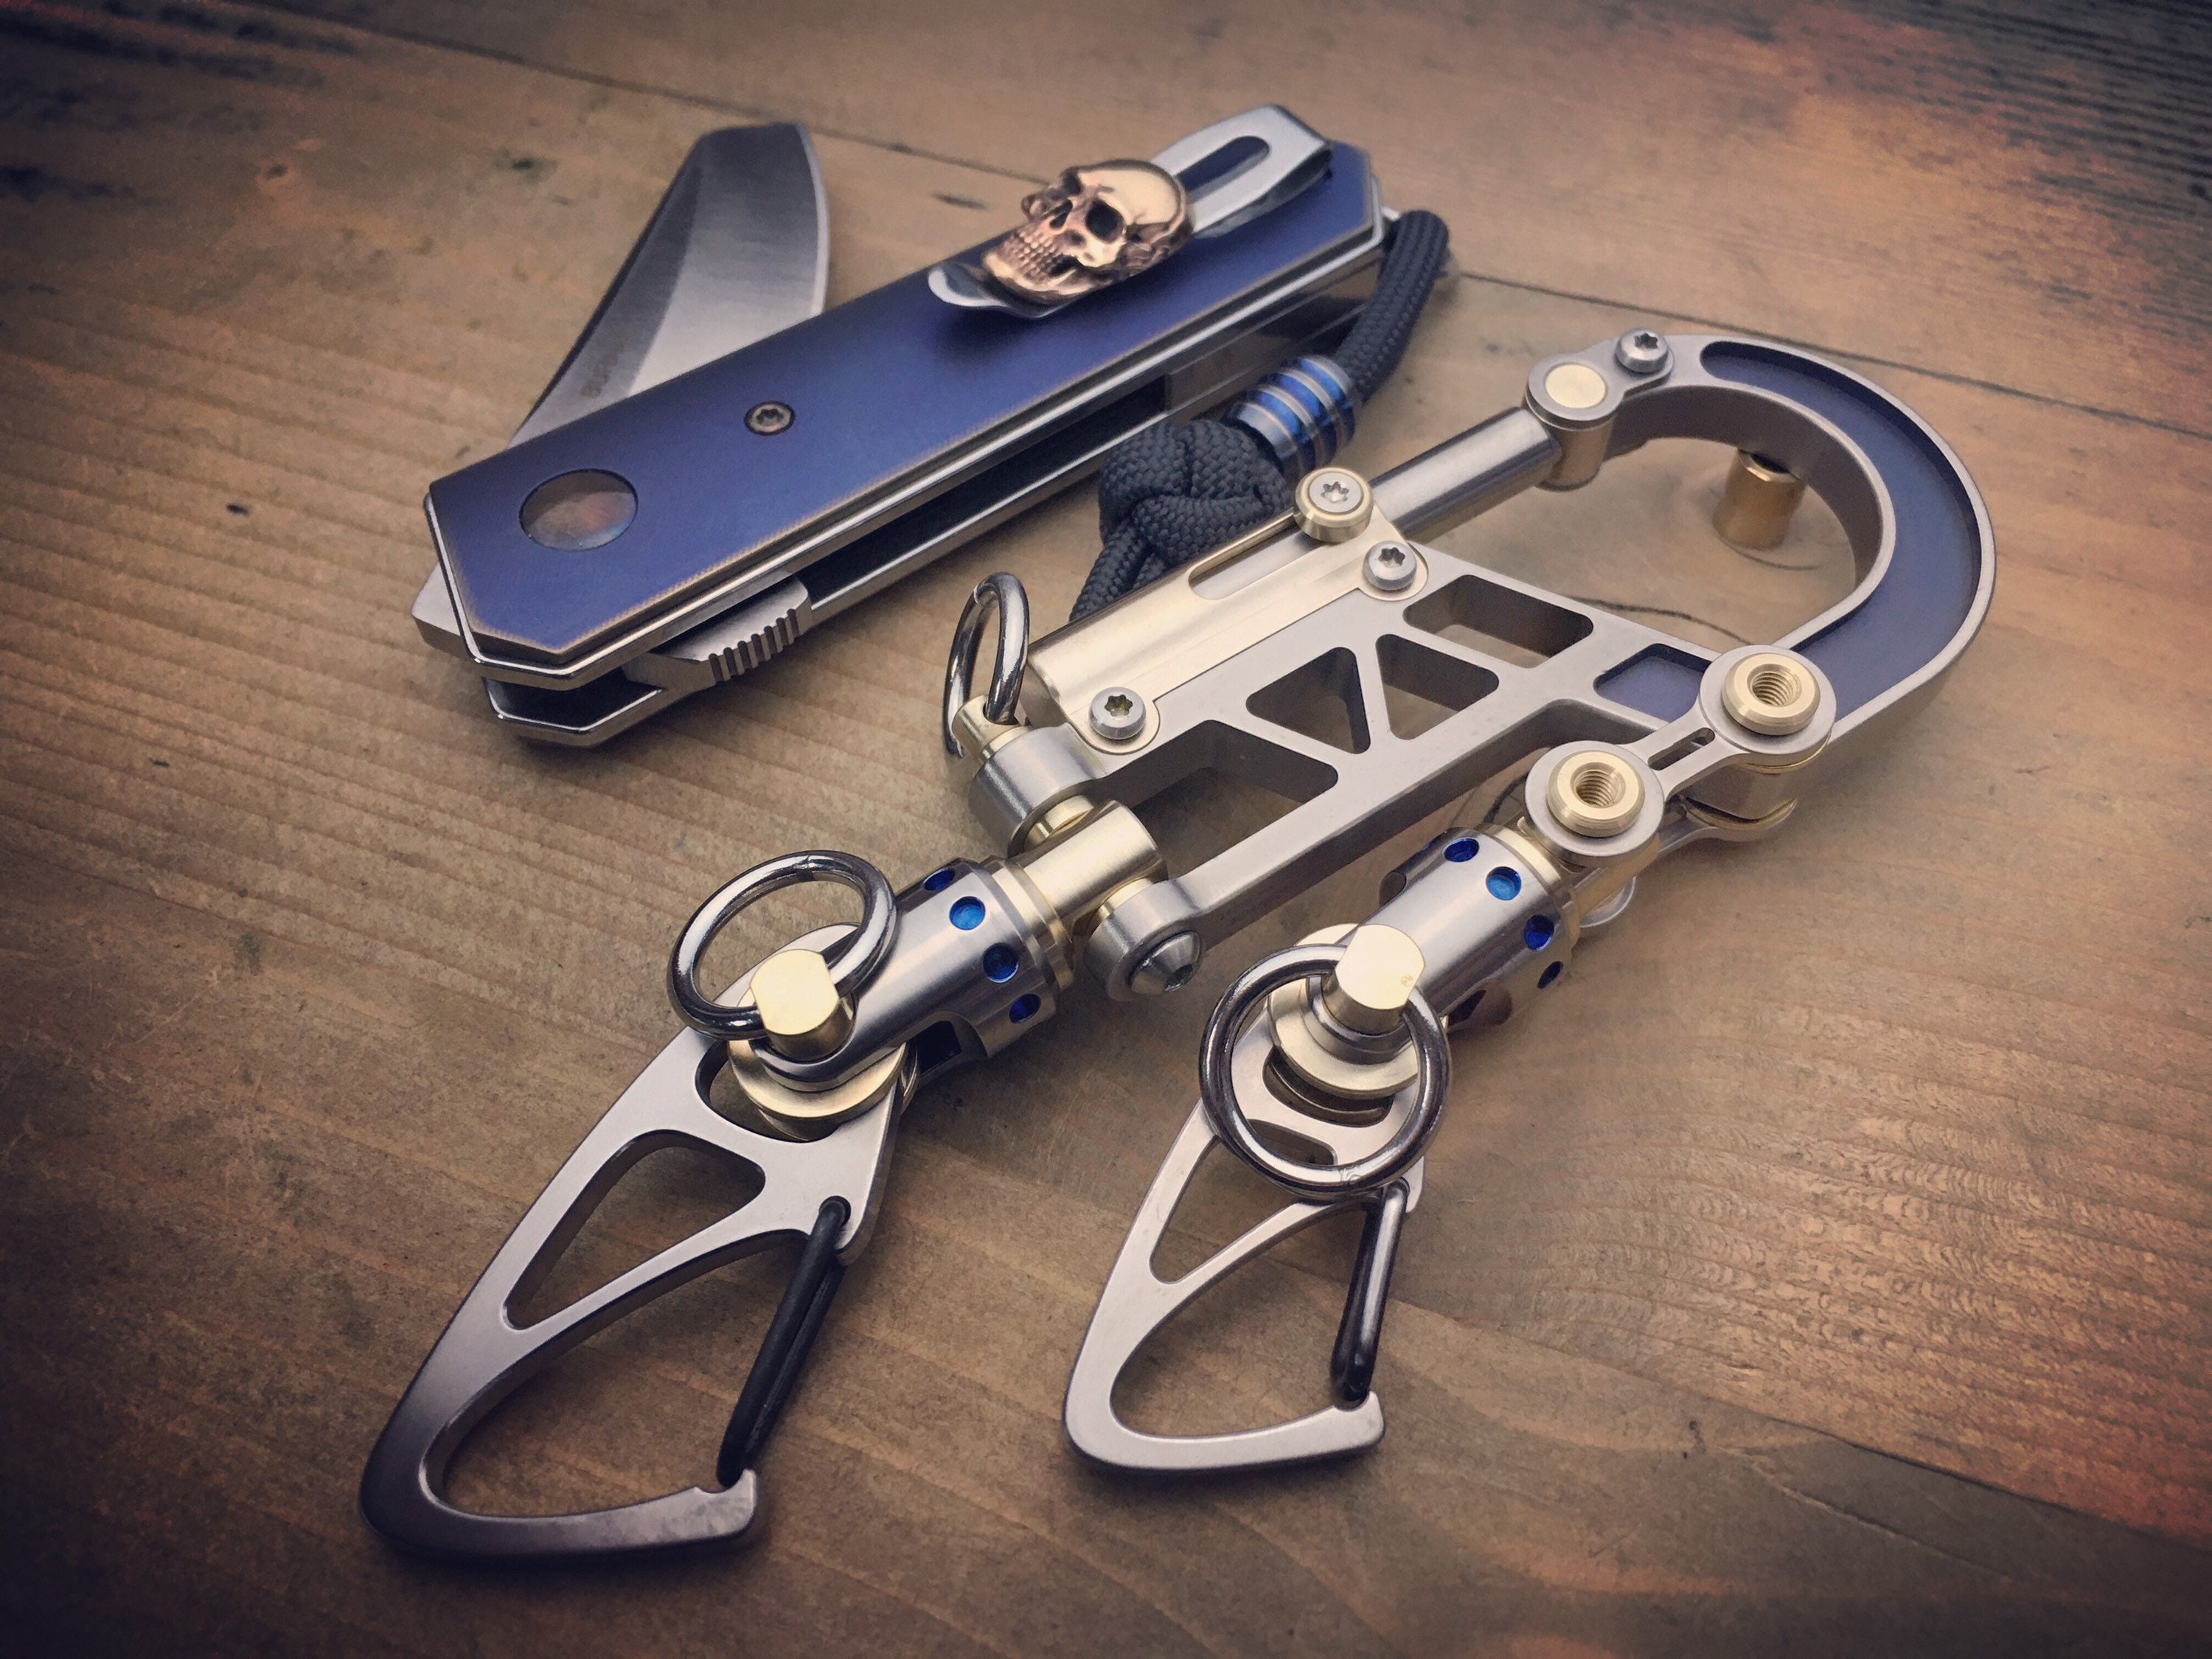 The Guide TOP / Titanium Edc Keychain Bi-carabiner, With Swivel Takes  Turns. 